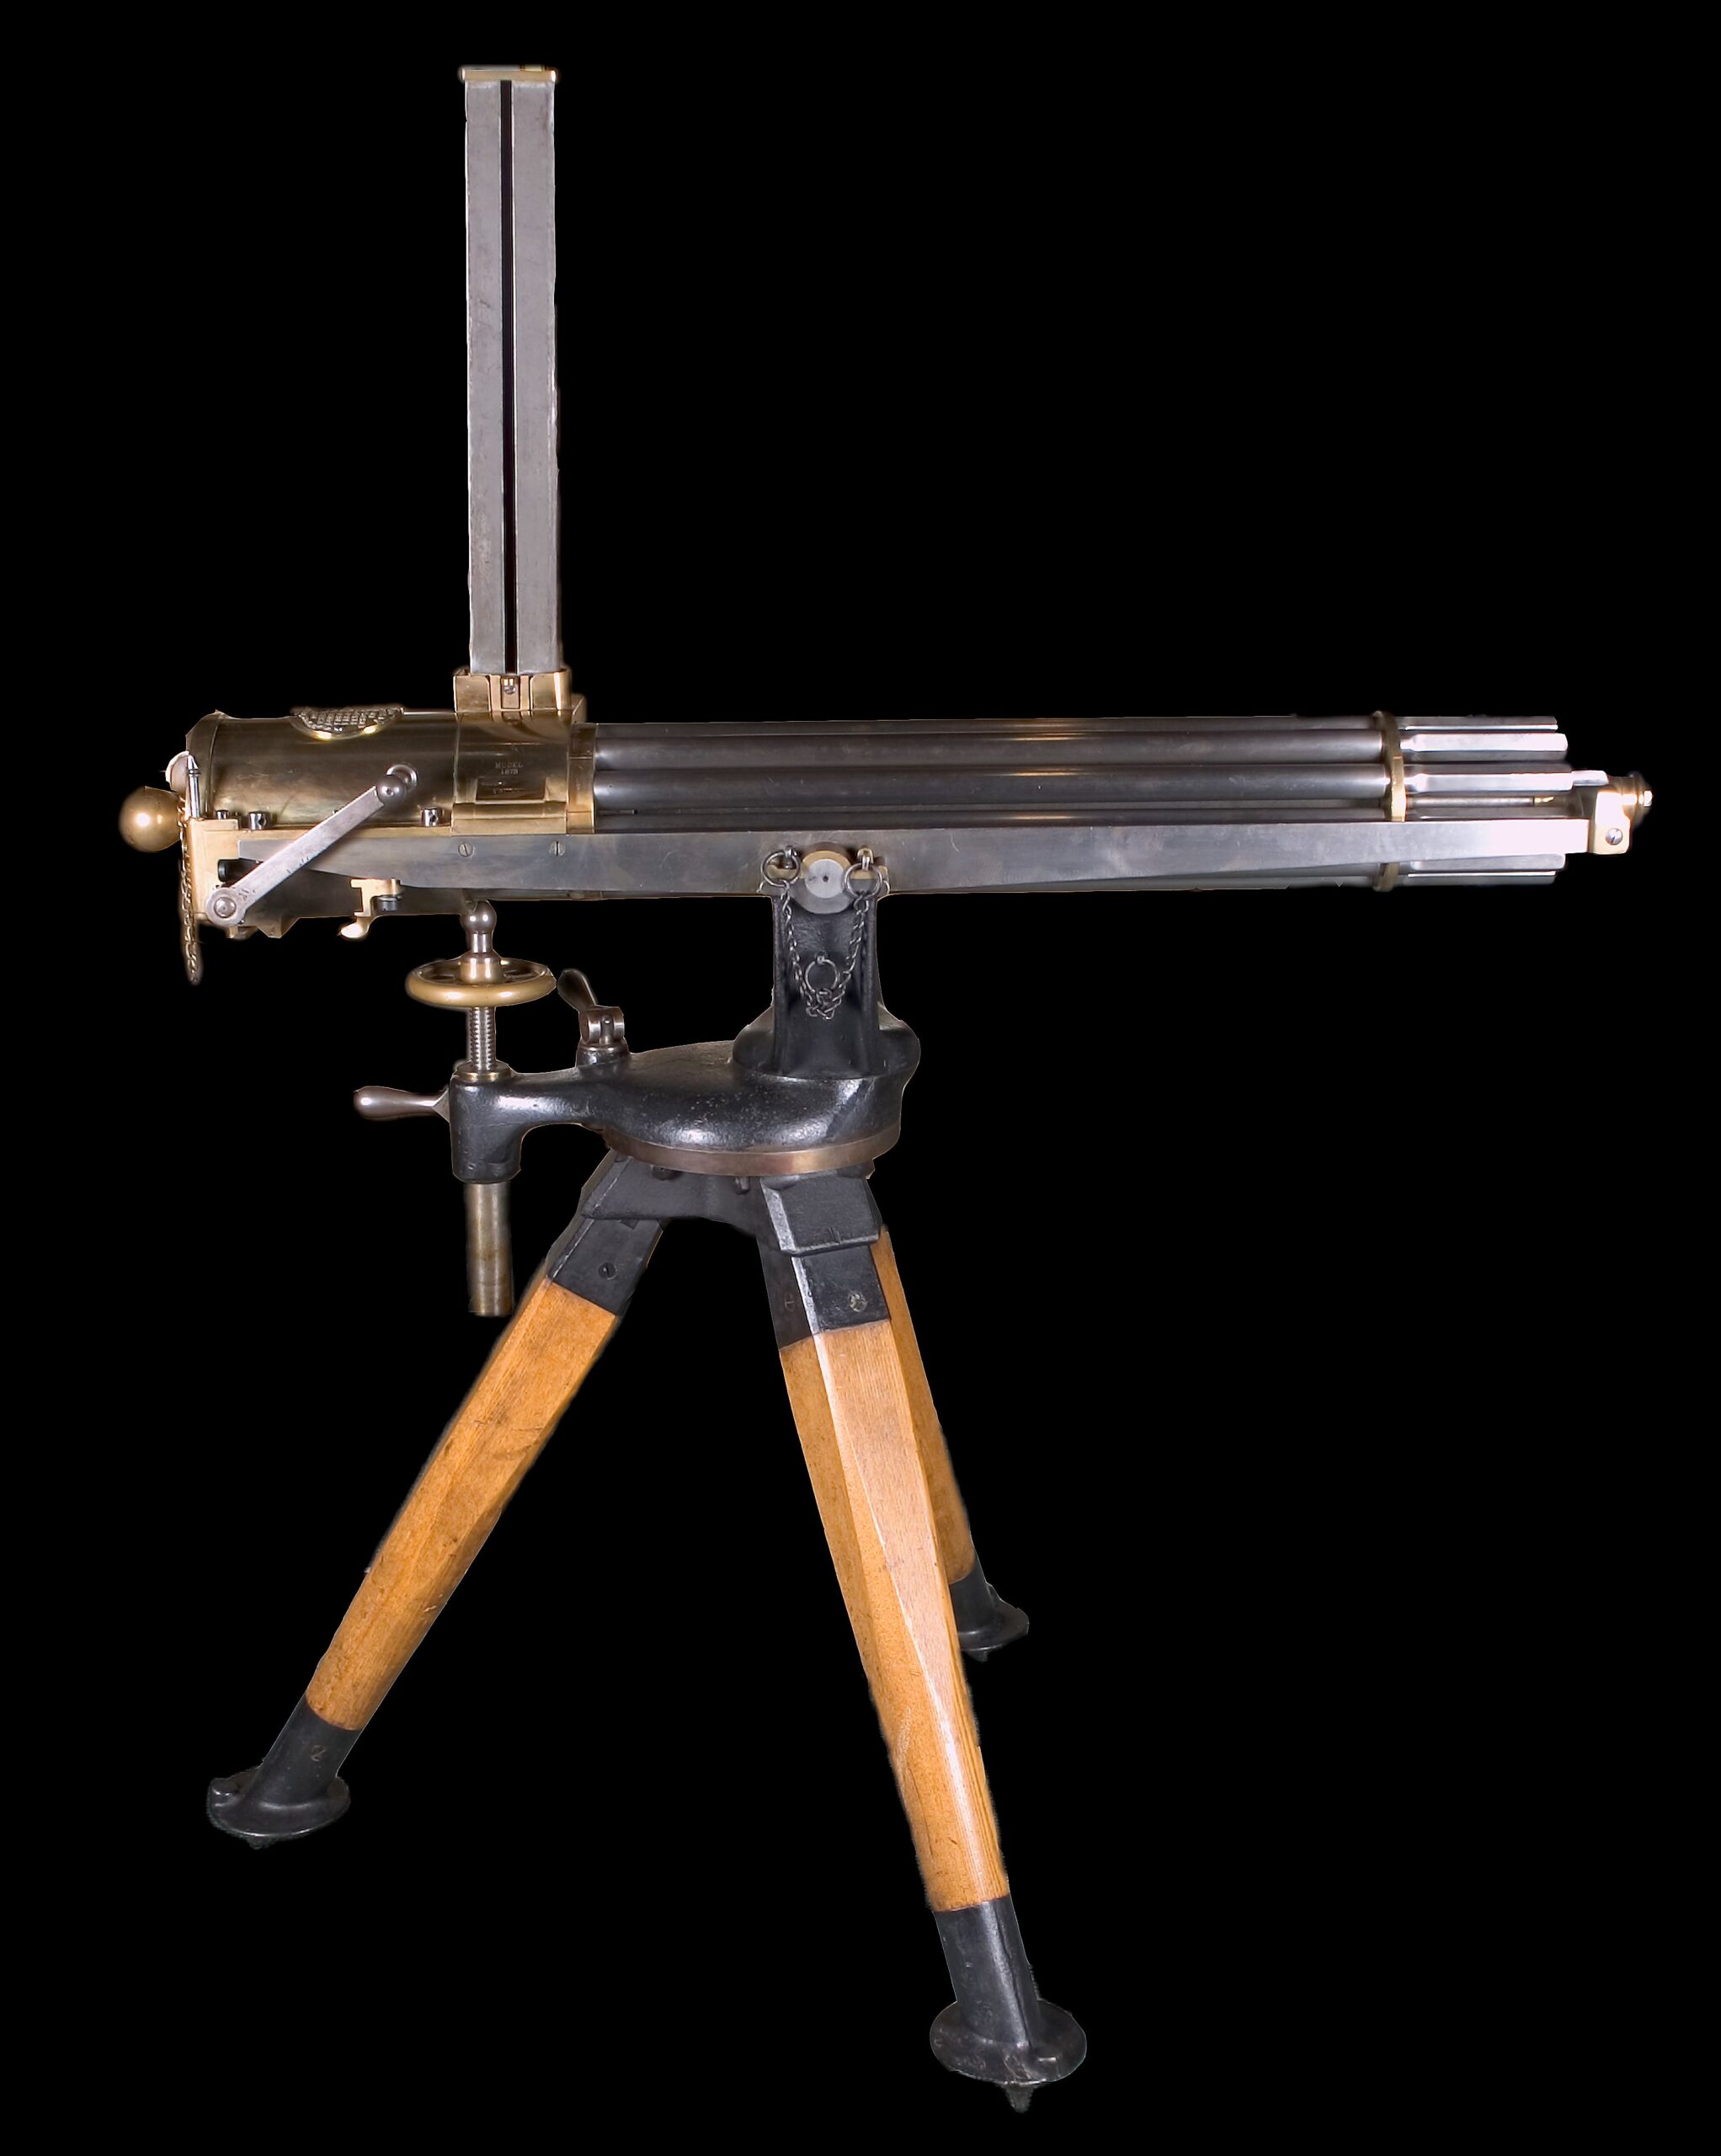 The hand-cranked Gatling gun wasn't widely used by the U.S. Military.